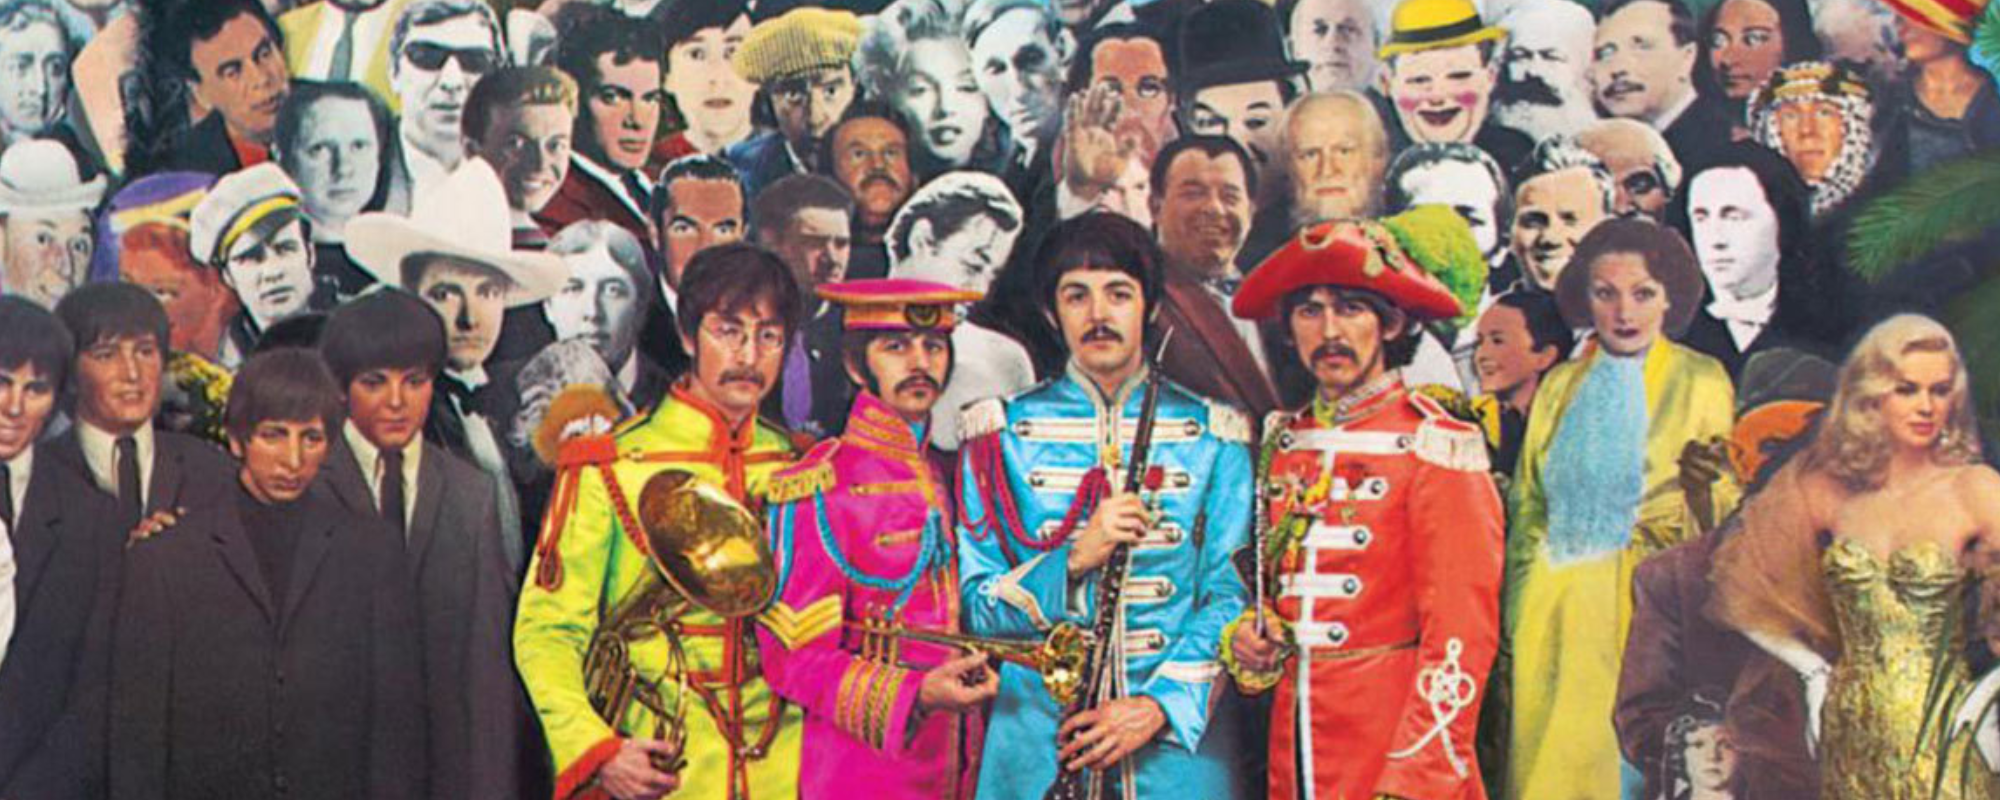 Remember When: The Beatles’ ‘Sgt. Pepper’s Lonely Hearts Club Band’ Album Won 4 Grammys on Leap Day 1968